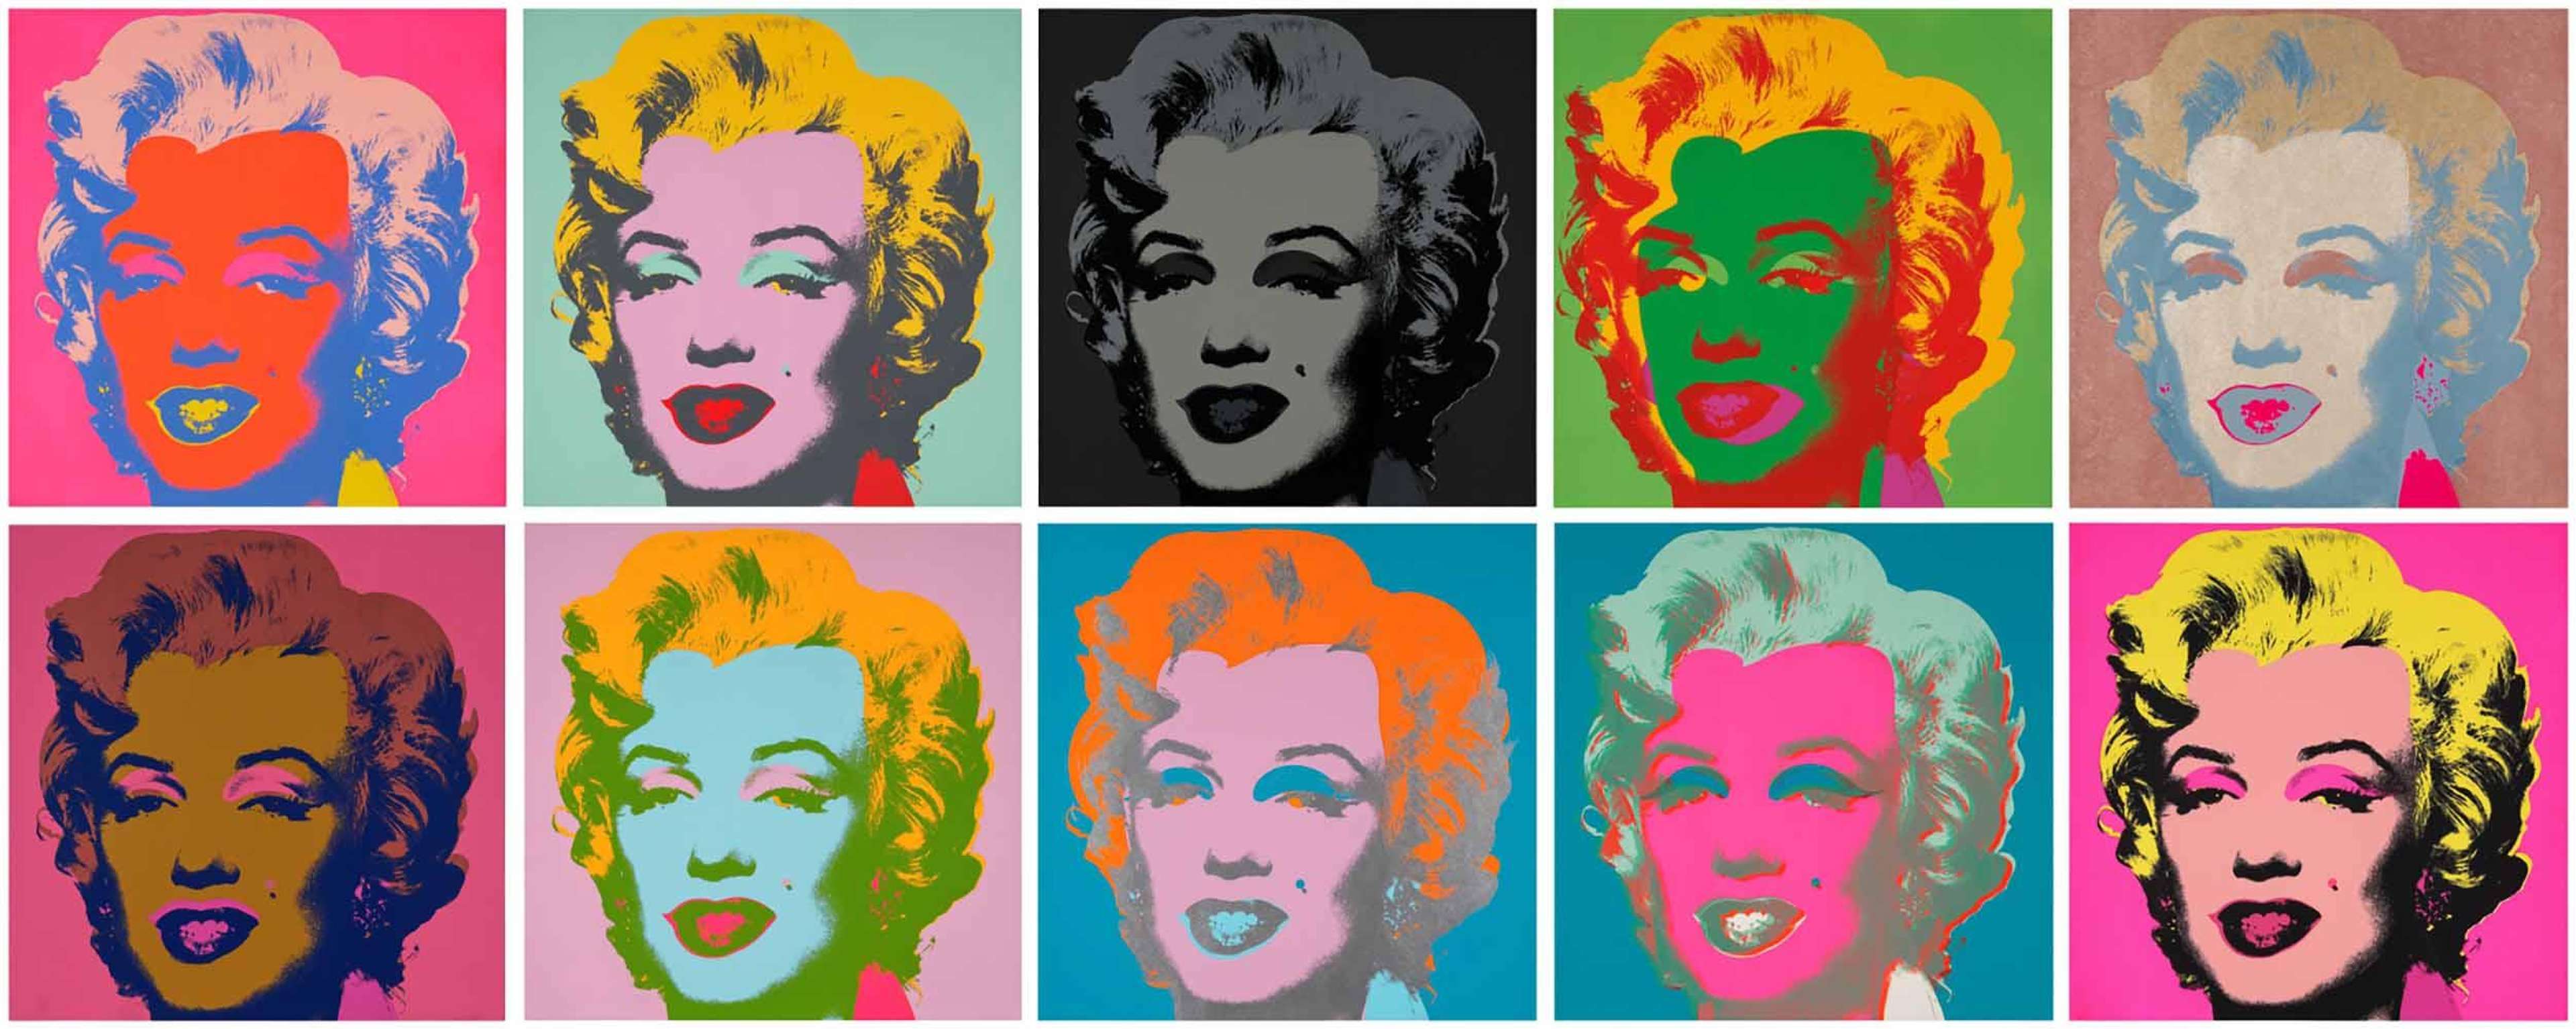 A set of five screenprints by Andy Warhol depicting the same portrait of Marilyn Monroe in various bright colourways.